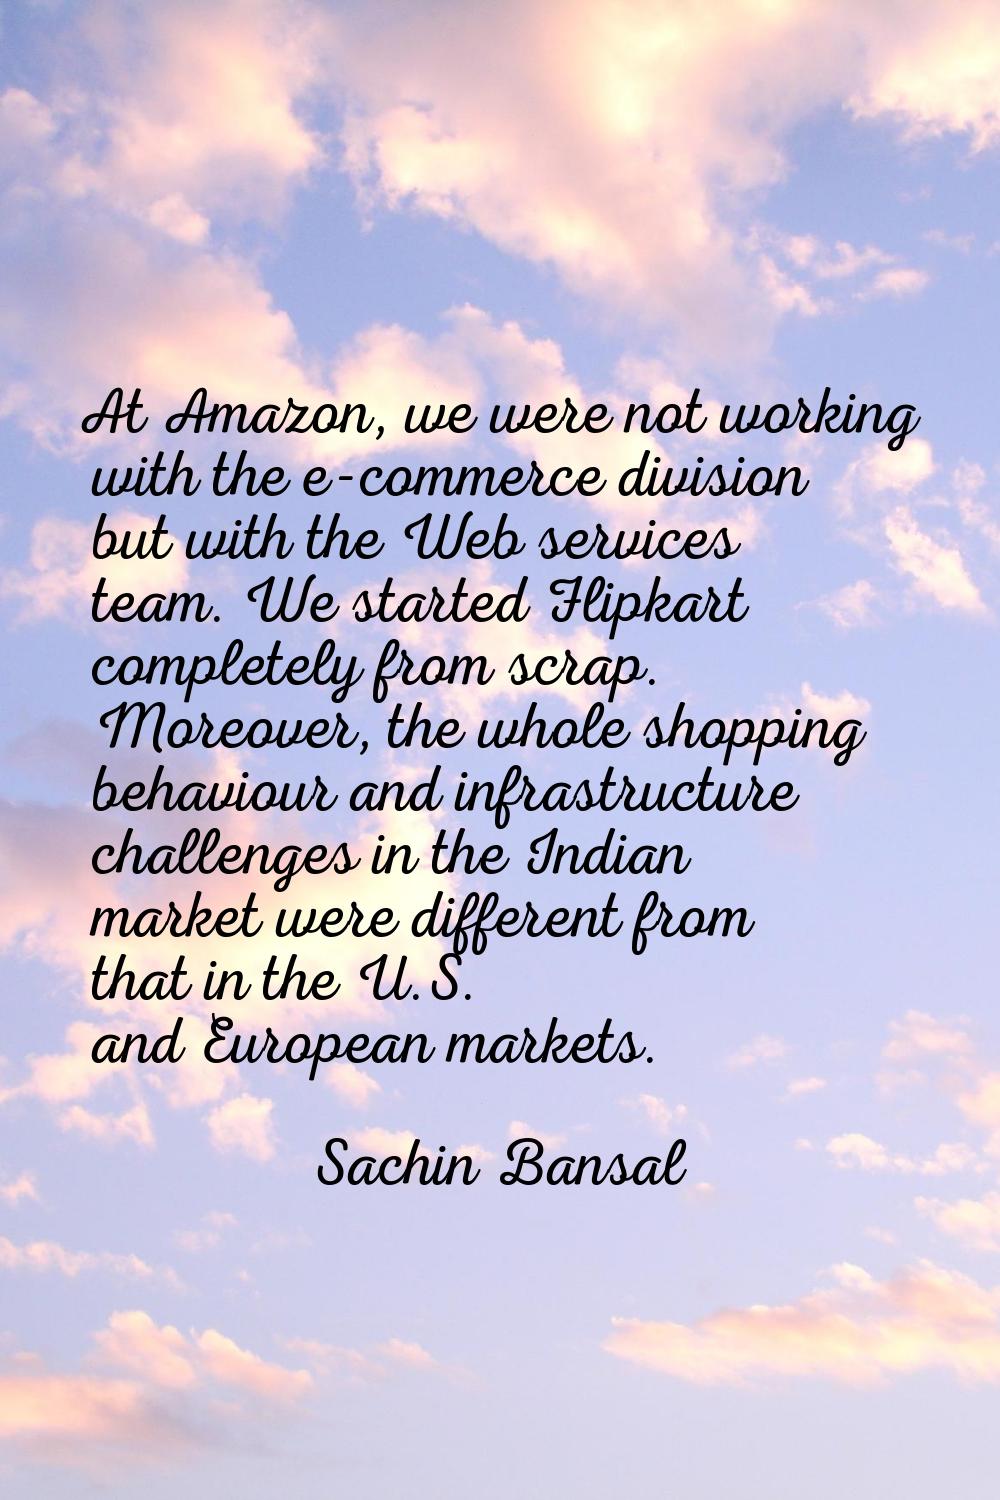 At Amazon, we were not working with the e-commerce division but with the Web services team. We star